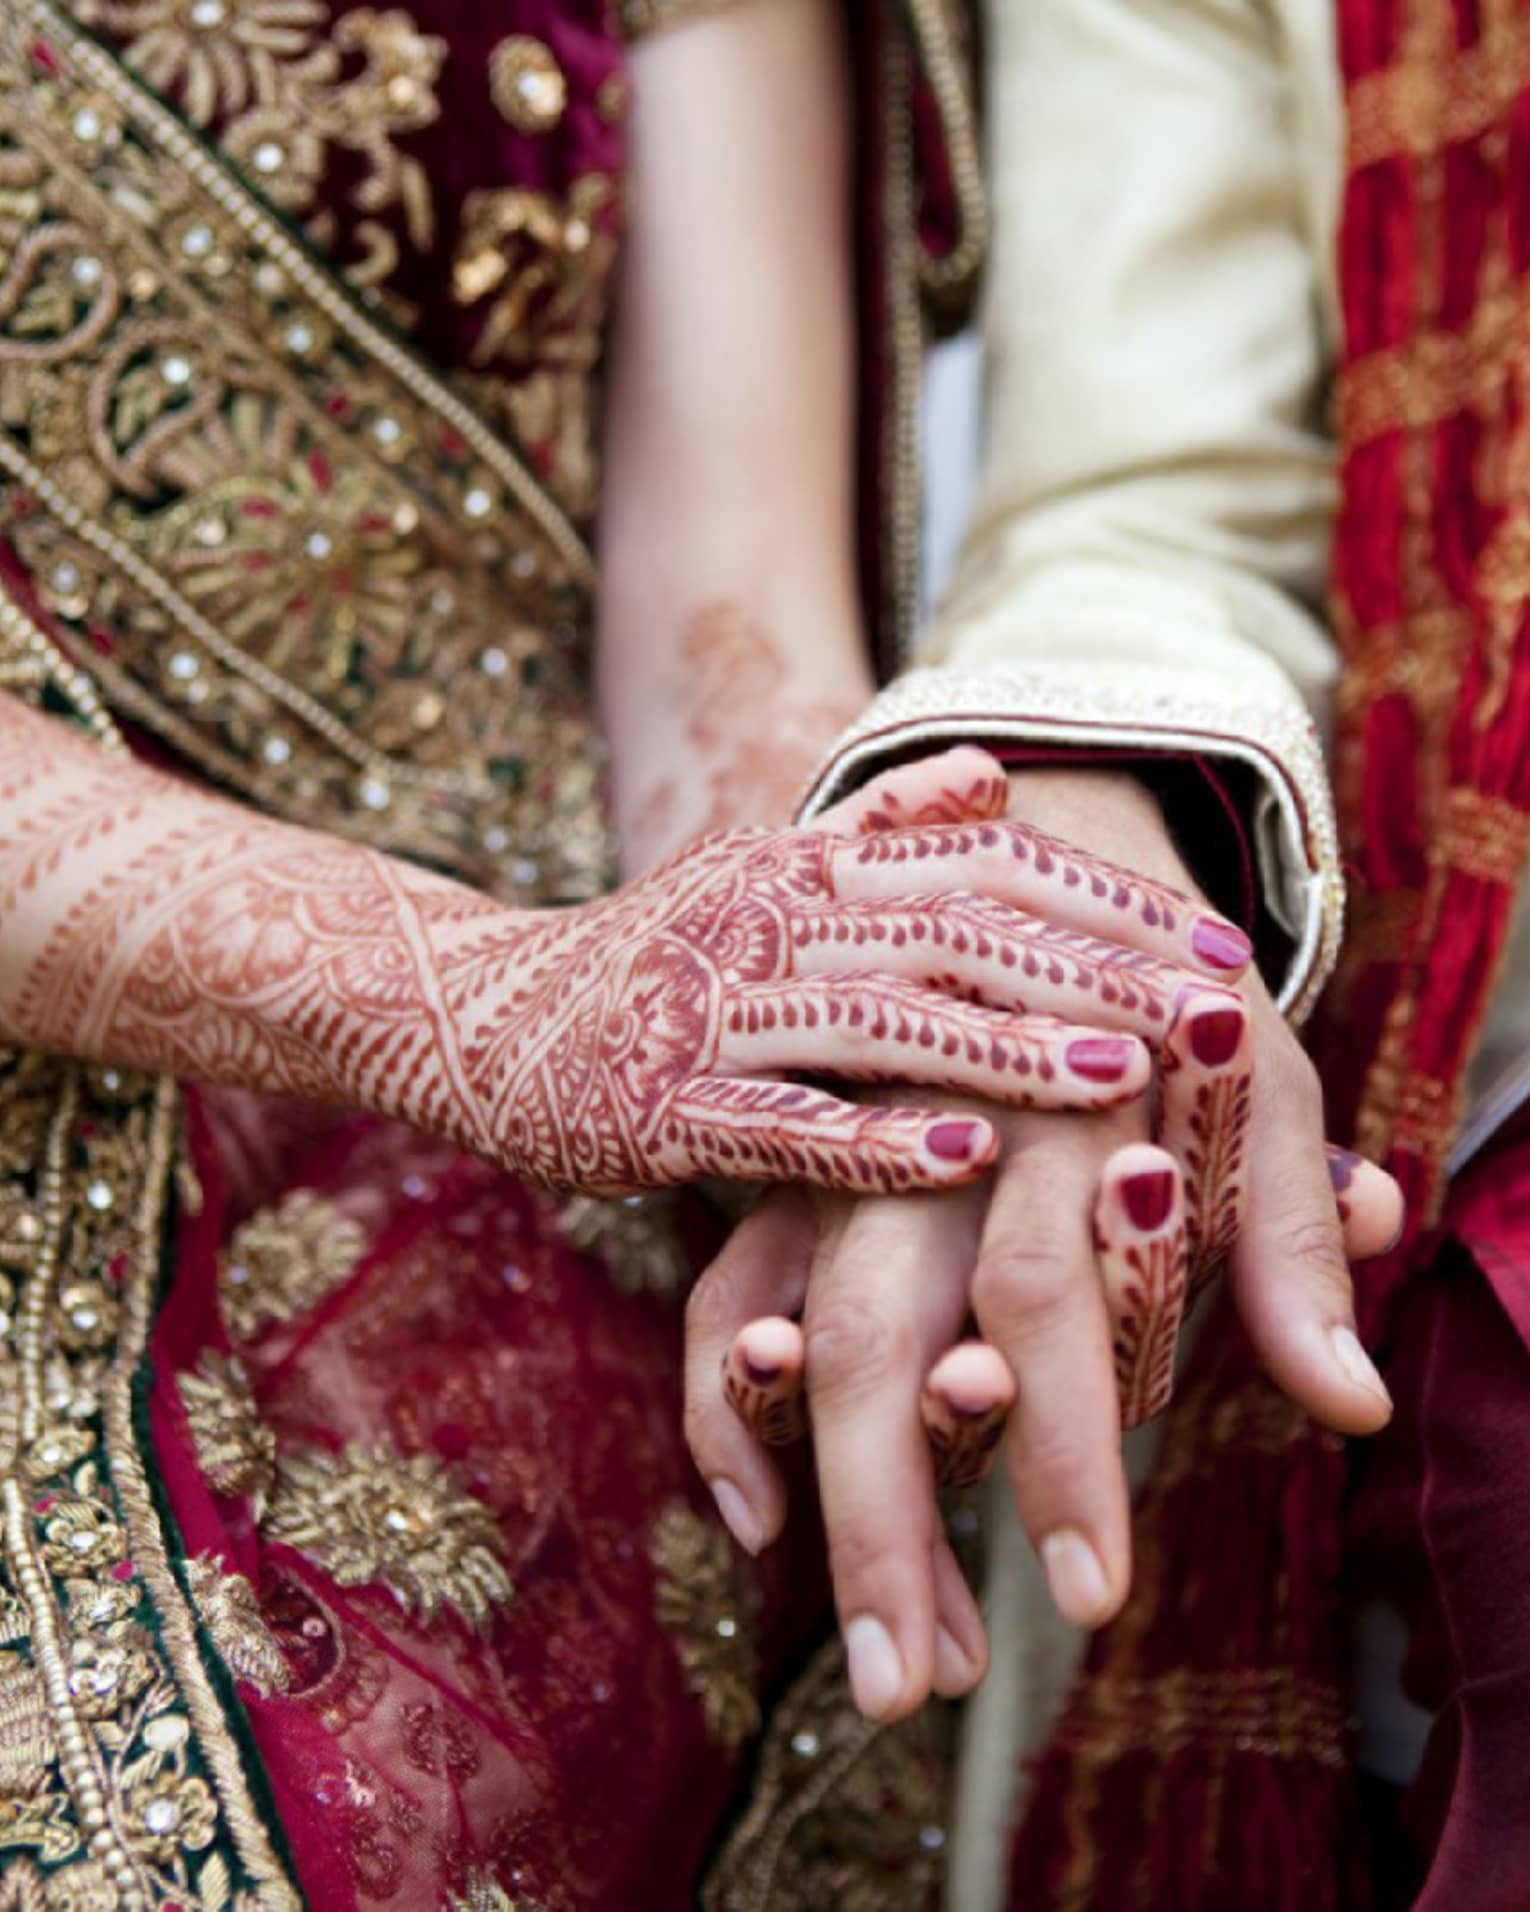 Indian wedding ceremony, bride with henna designs on arm holds groom's hands